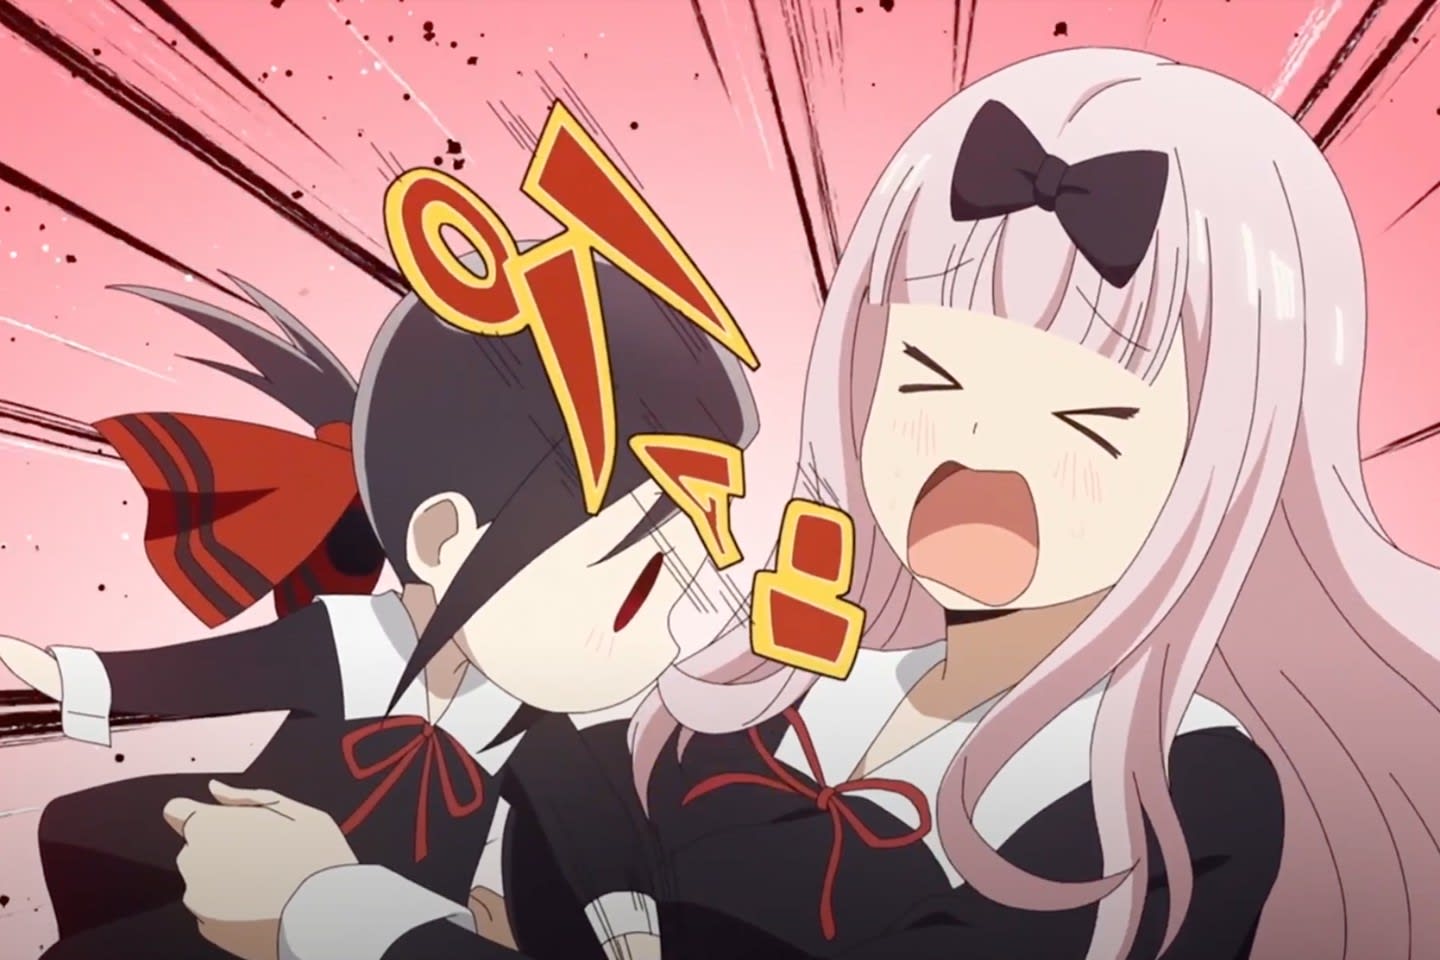 How to watch Kaguya-sama Love Is War – The First Kiss That Never